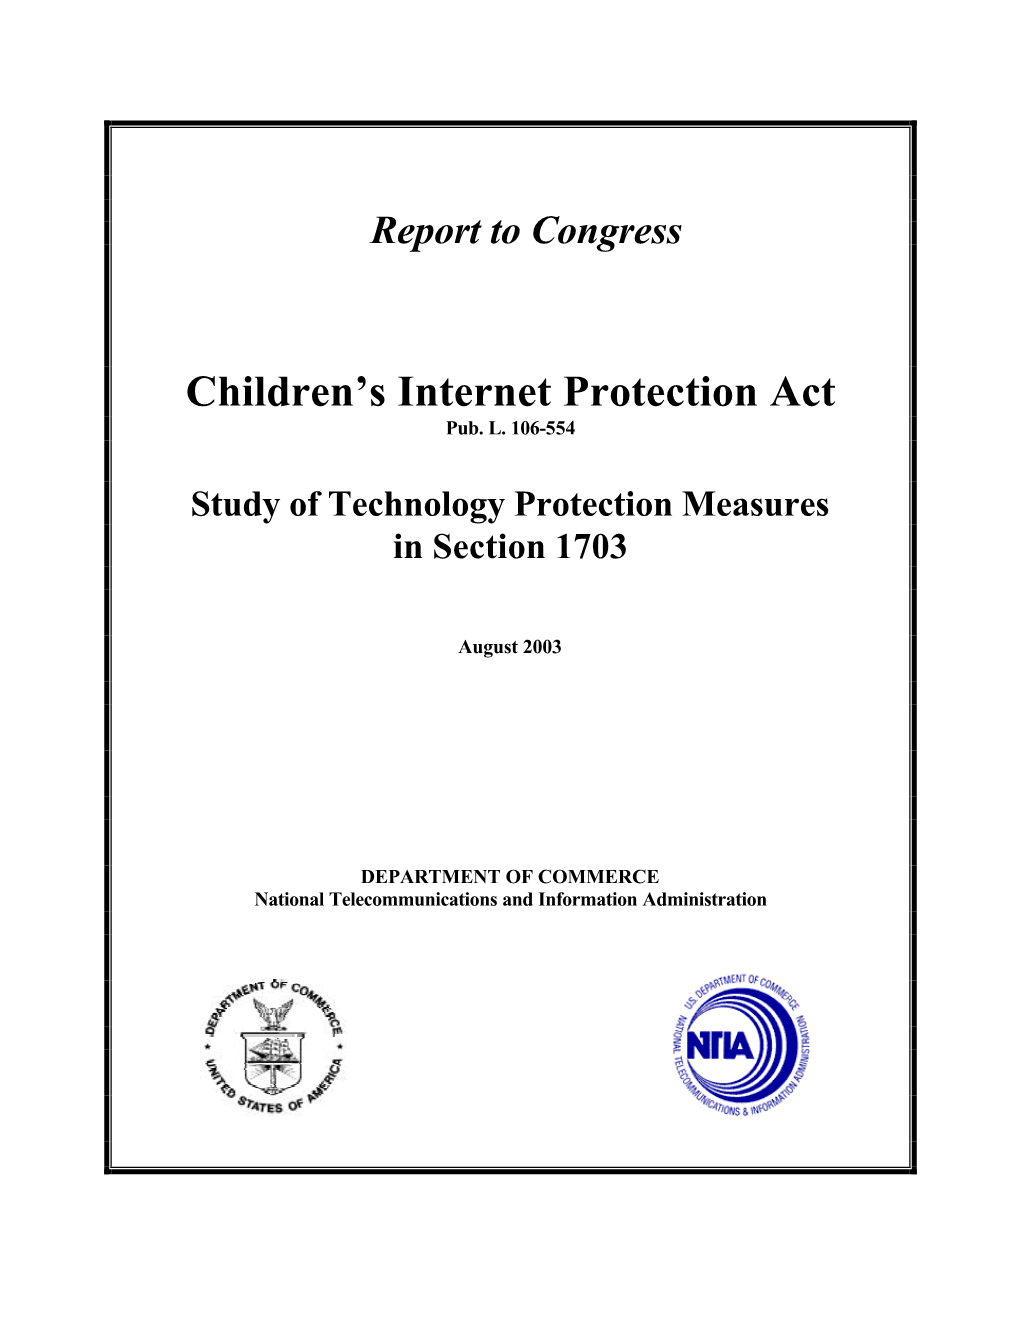 Children's Internet Protection Act (CIPA), Id